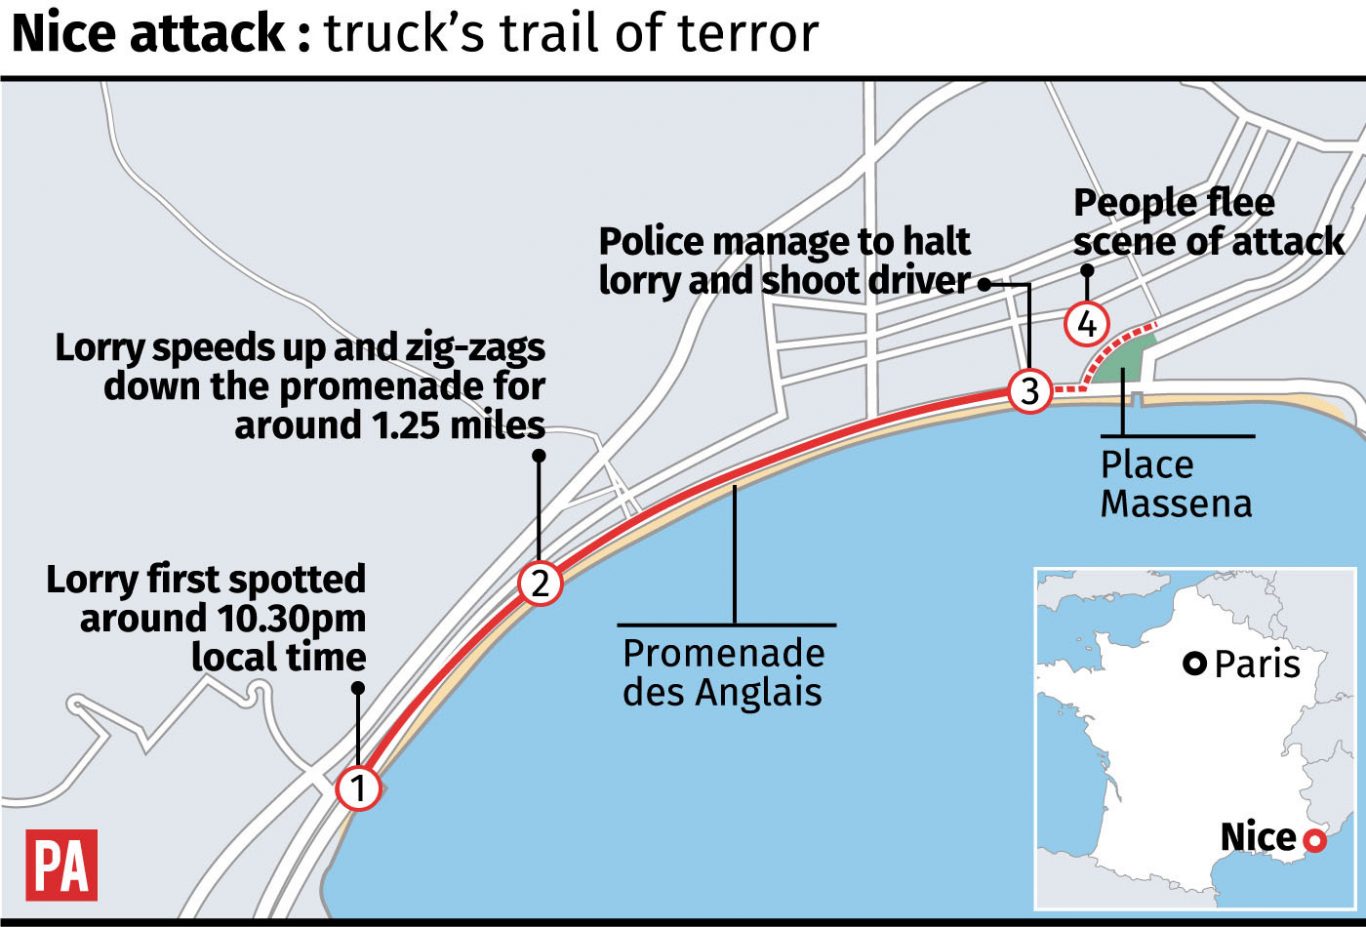 Shows the one-mile trail of terror left by the truck attack in Nice